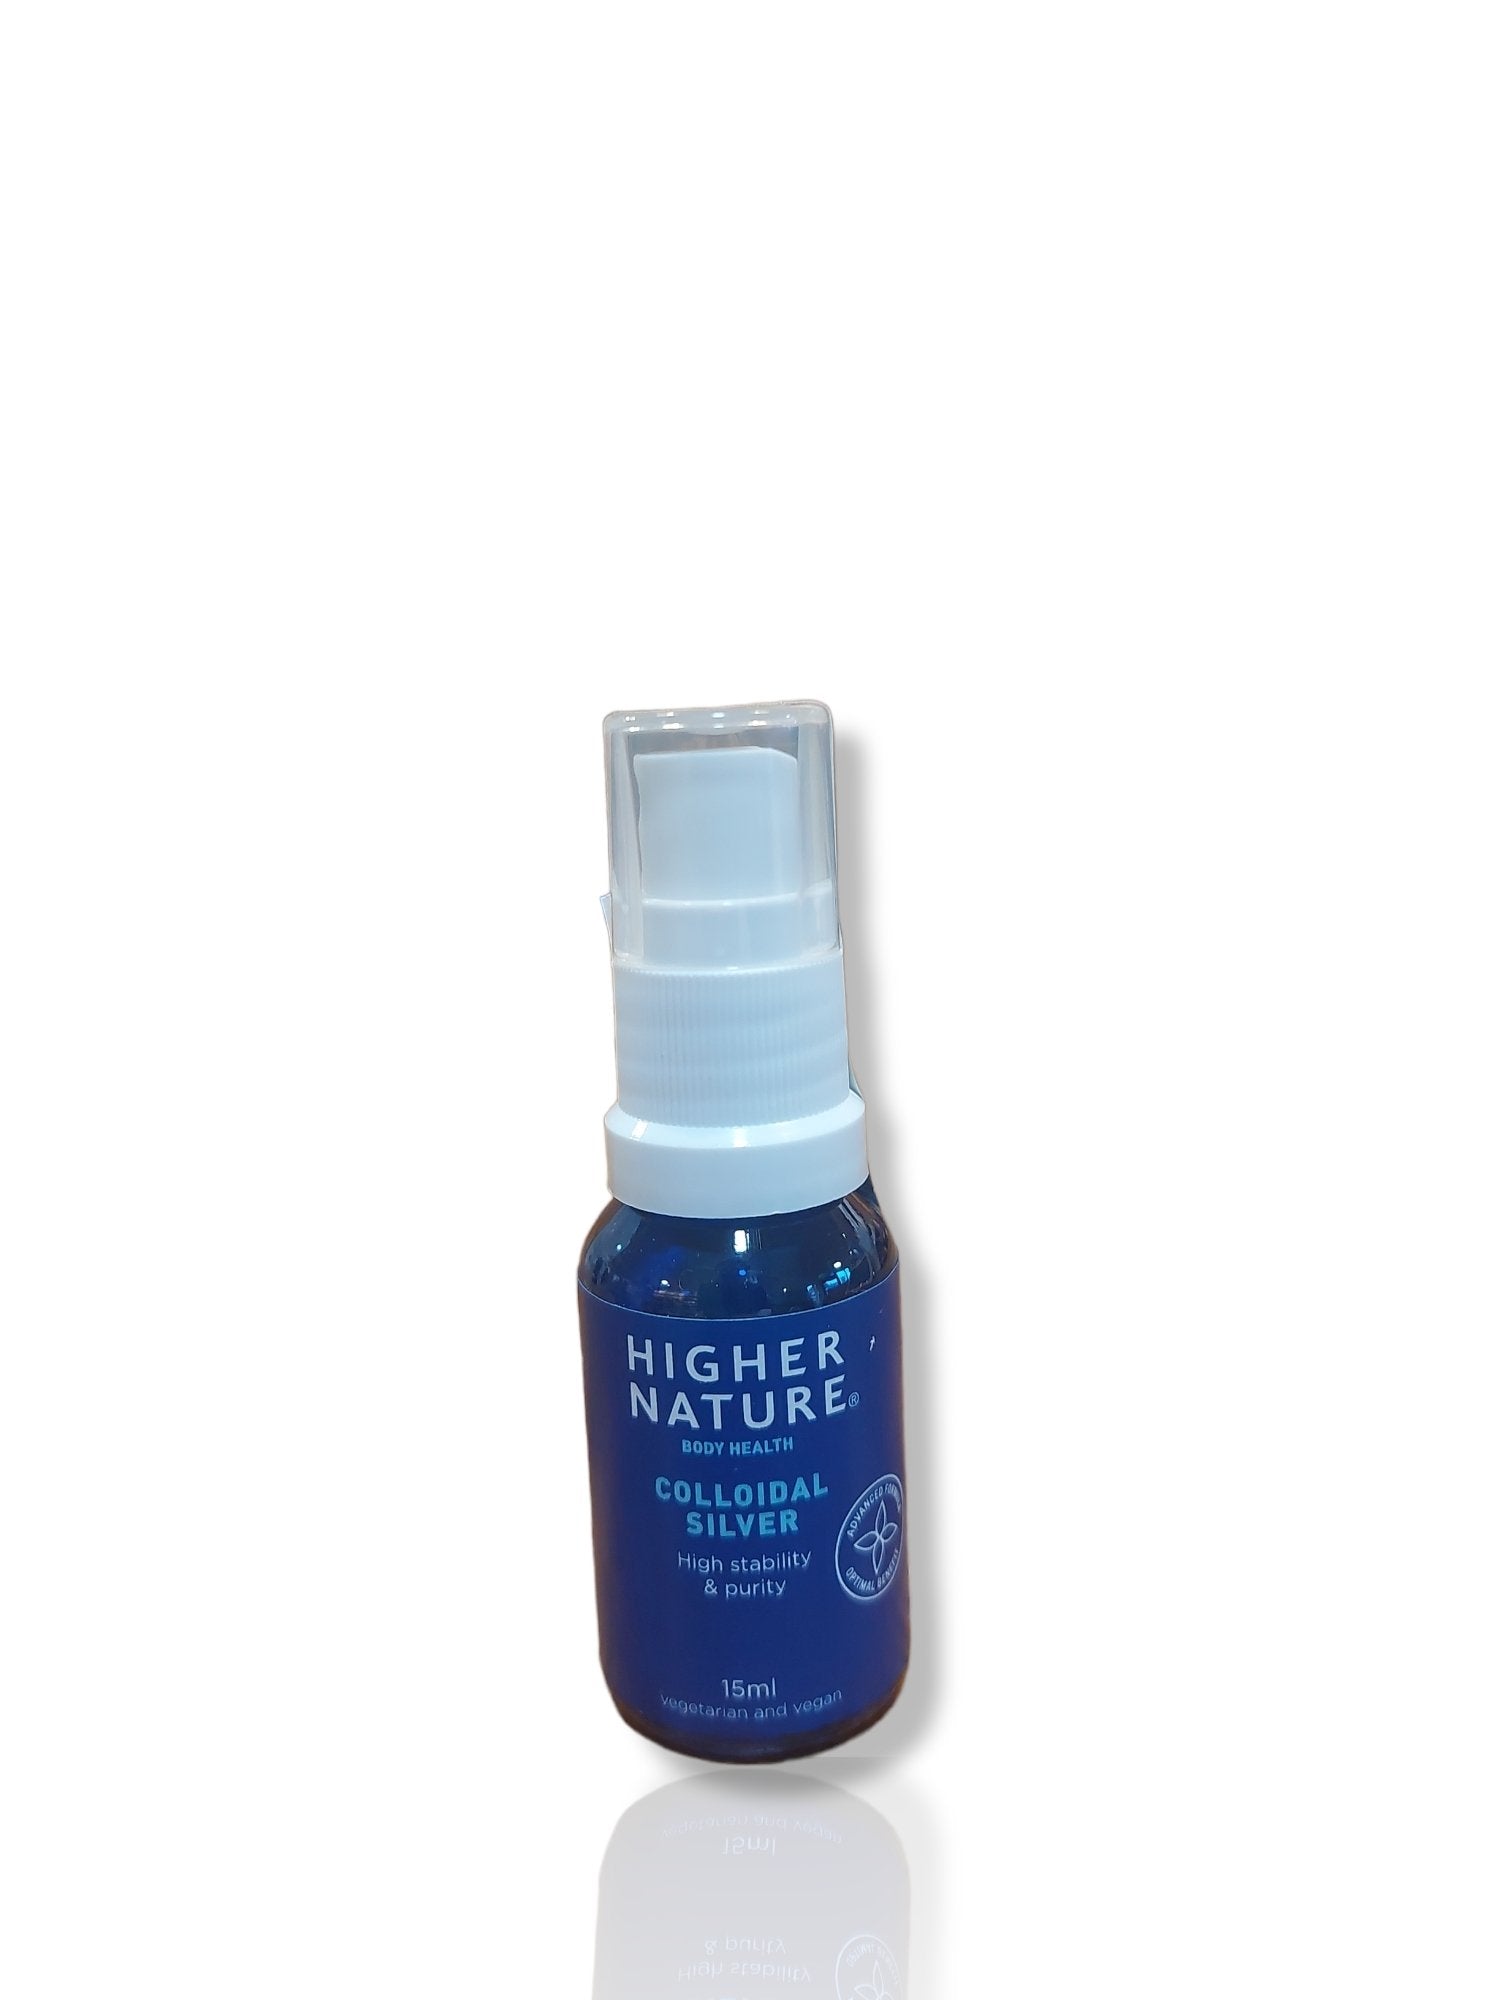 Higher Nature Colloidal Silver - HealthyLiving.ie